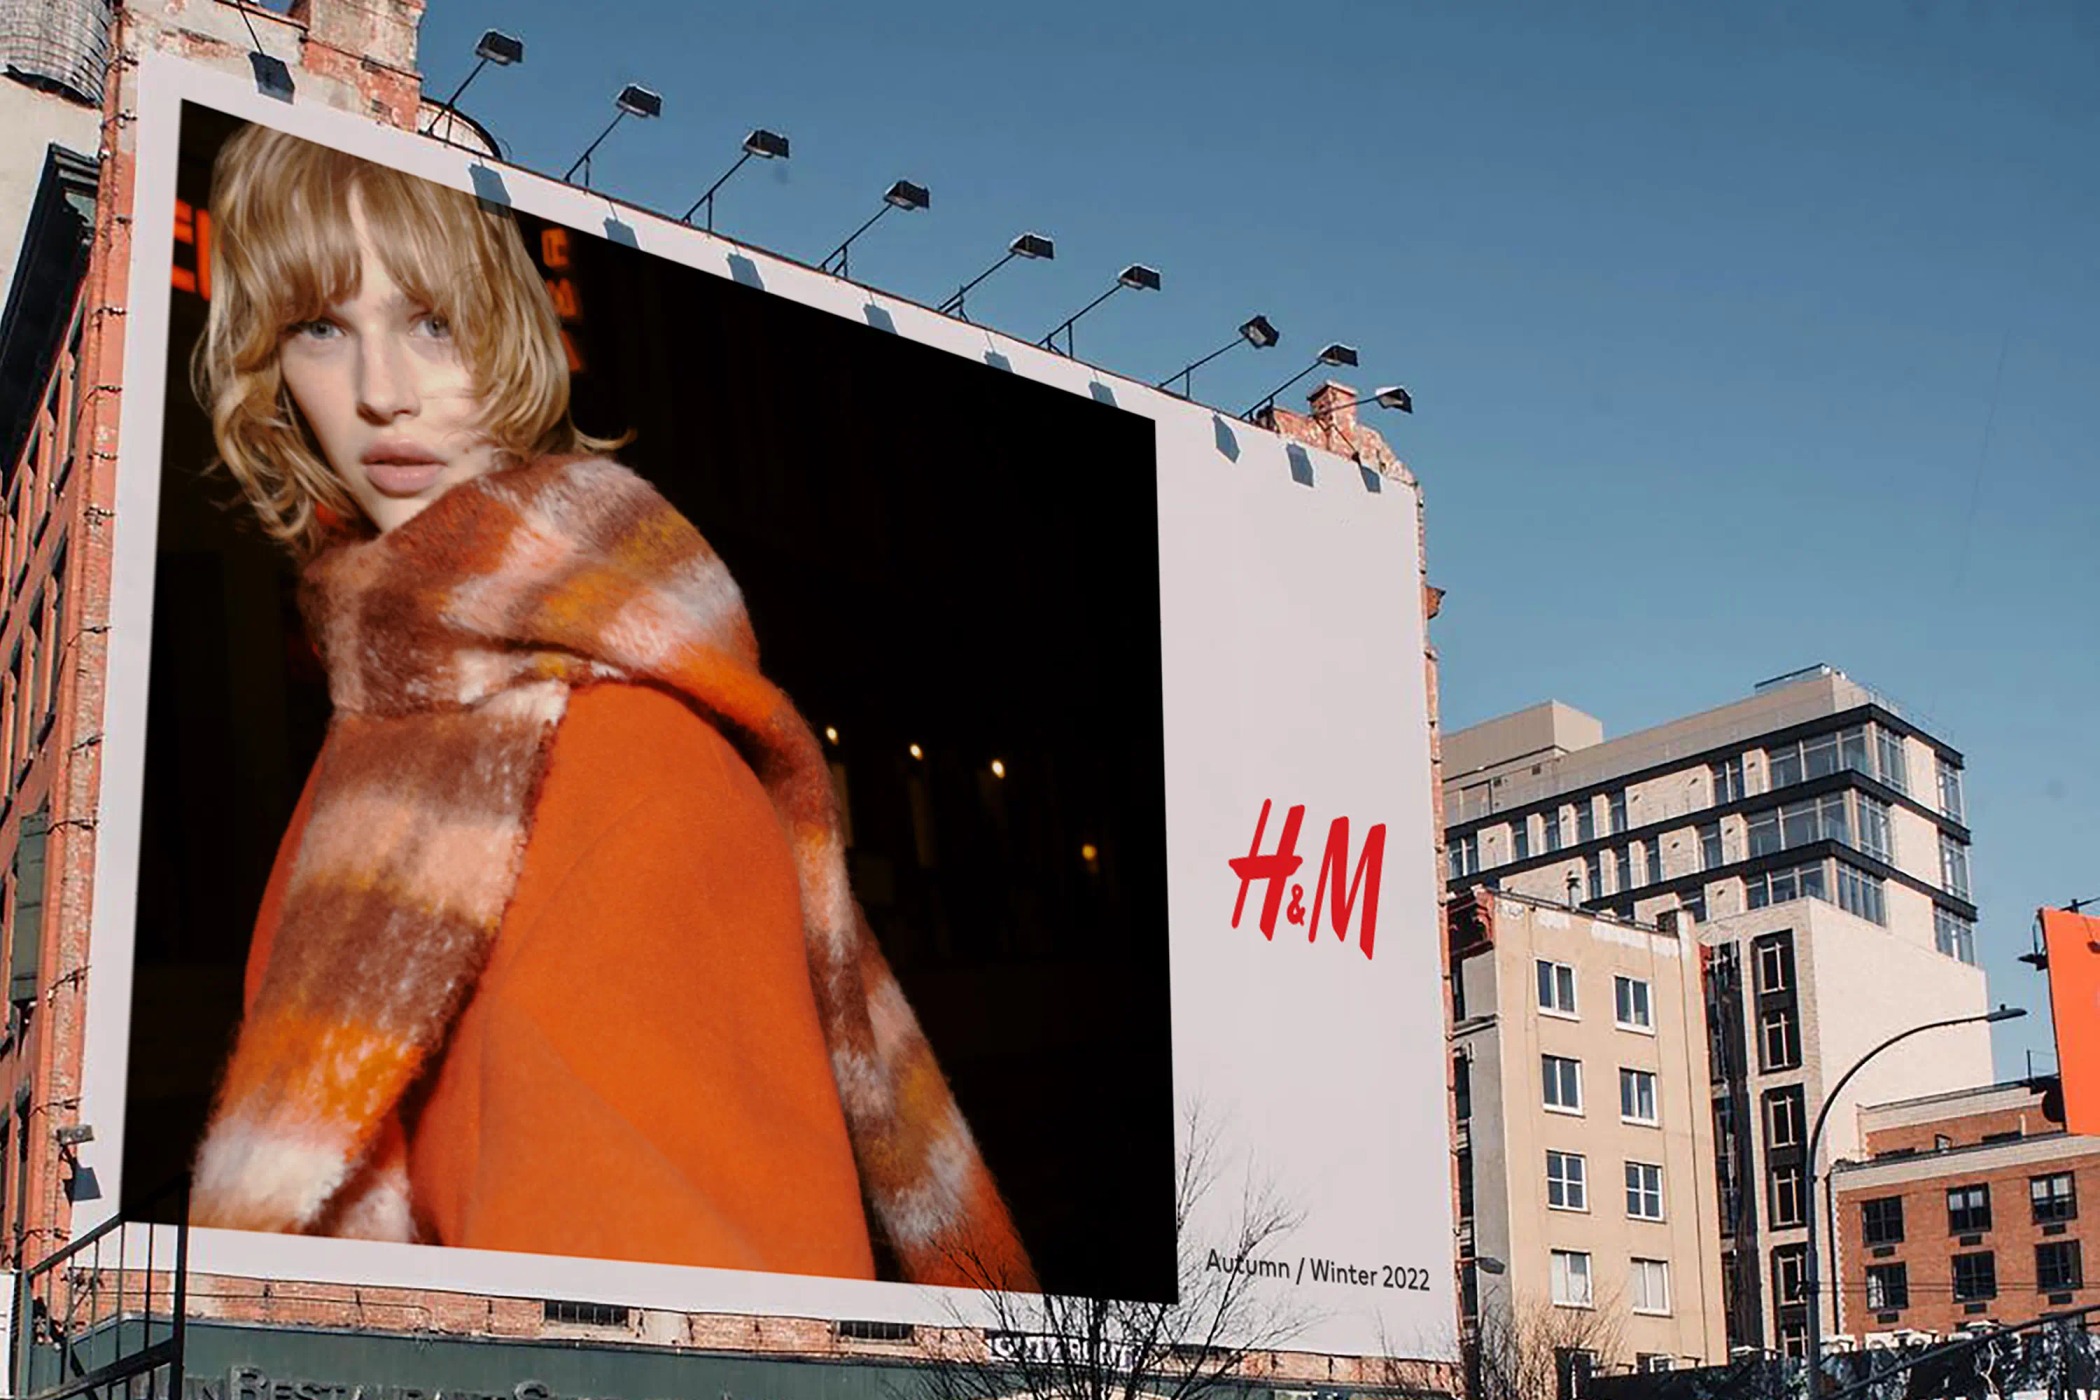 H&M Autumn Winter campaign Imagery creative direction shot by Tom Johnson